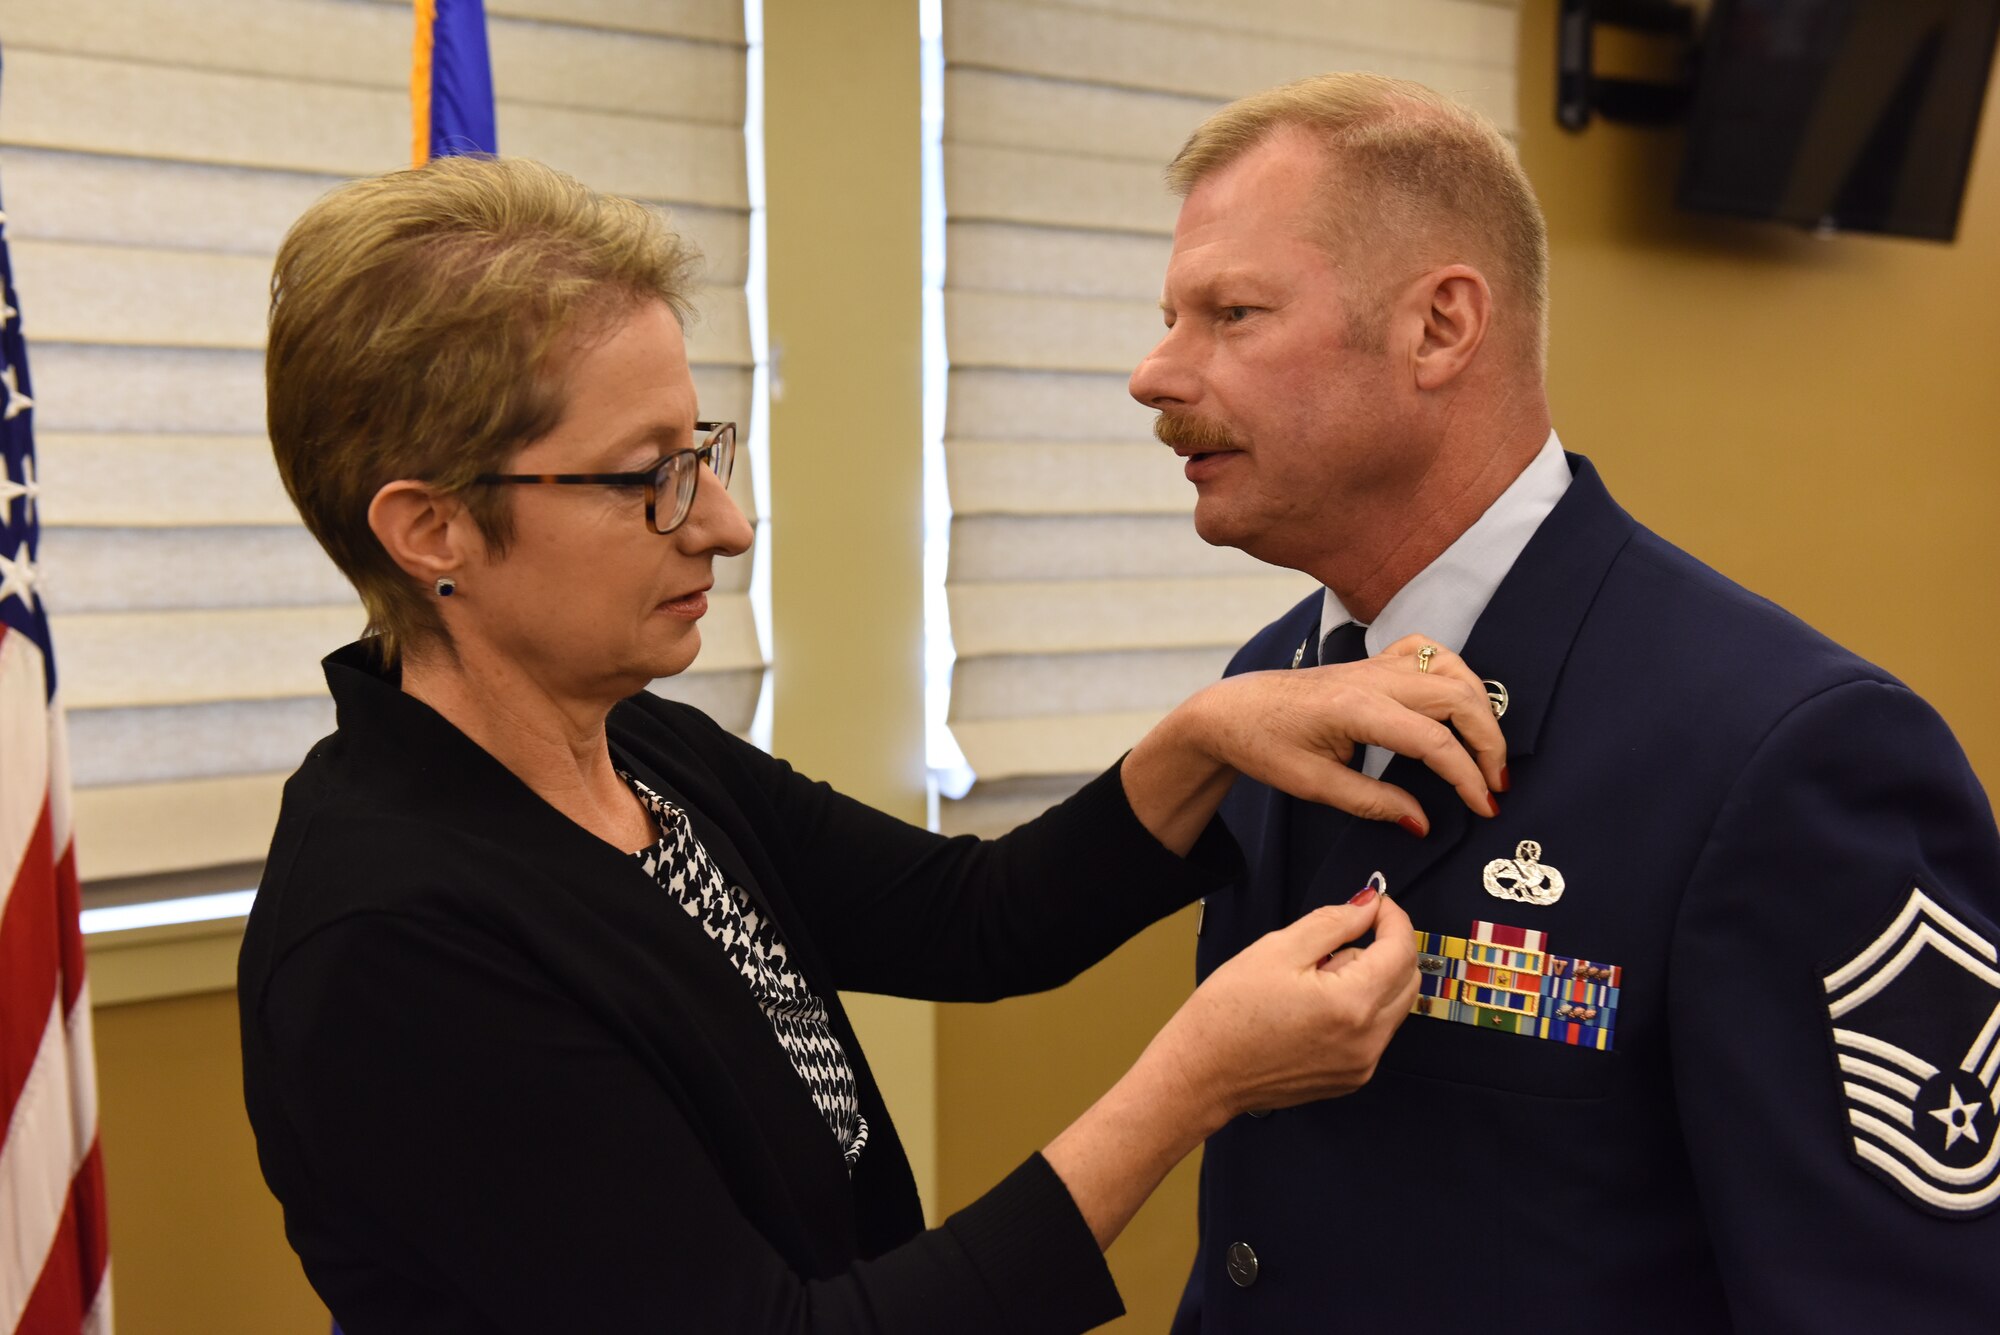 Lynne Szydel, wife of 911th Aircraft Maintenance Squadron Specialist Flight Chief Senior Master Sgt. John A. Szydel, affixes a retiree pin to her husband’s uniform at the Pittsburgh International Airport Air Reserve Station, Pennsylvania, Oct. 5, 2019.